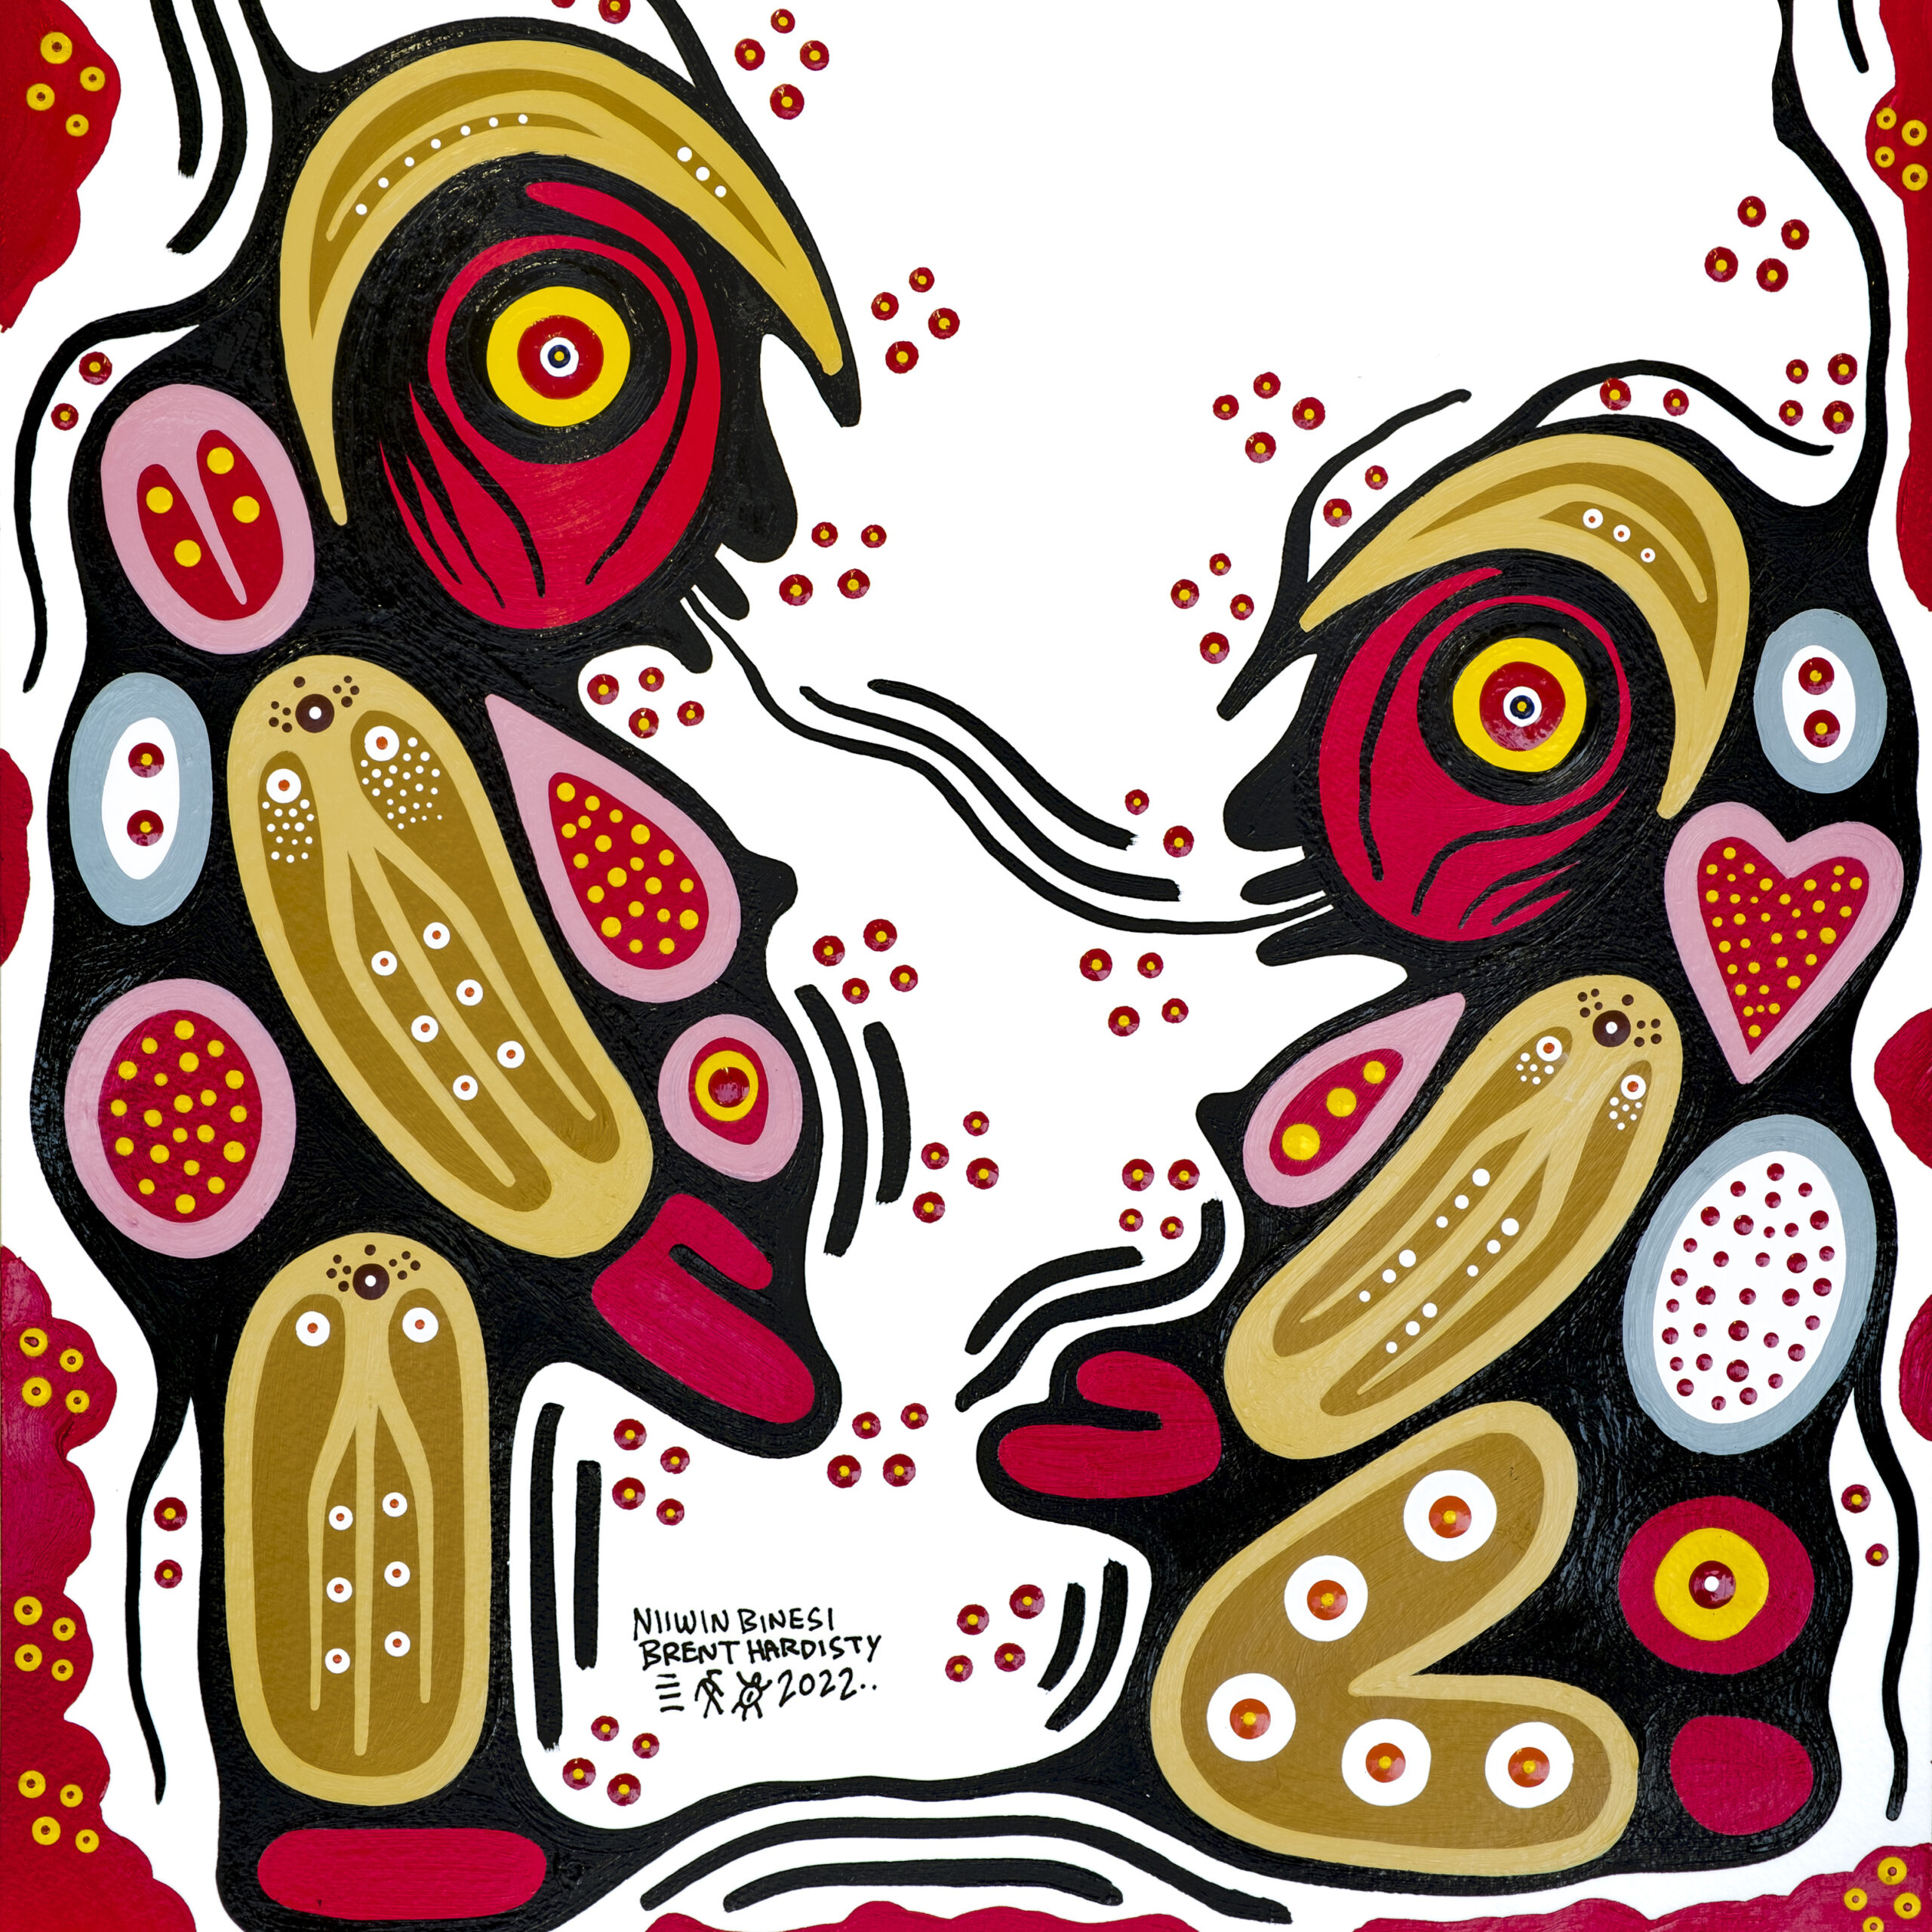 A painting by Brent Hardisty in the Anishinaabe Woodland style. A pregnant woman is standing, and power-lines show her speaking to a kneeling woman. Above them, an owl is flying. The painting is in shades of red, blue, black and brown on a white background.